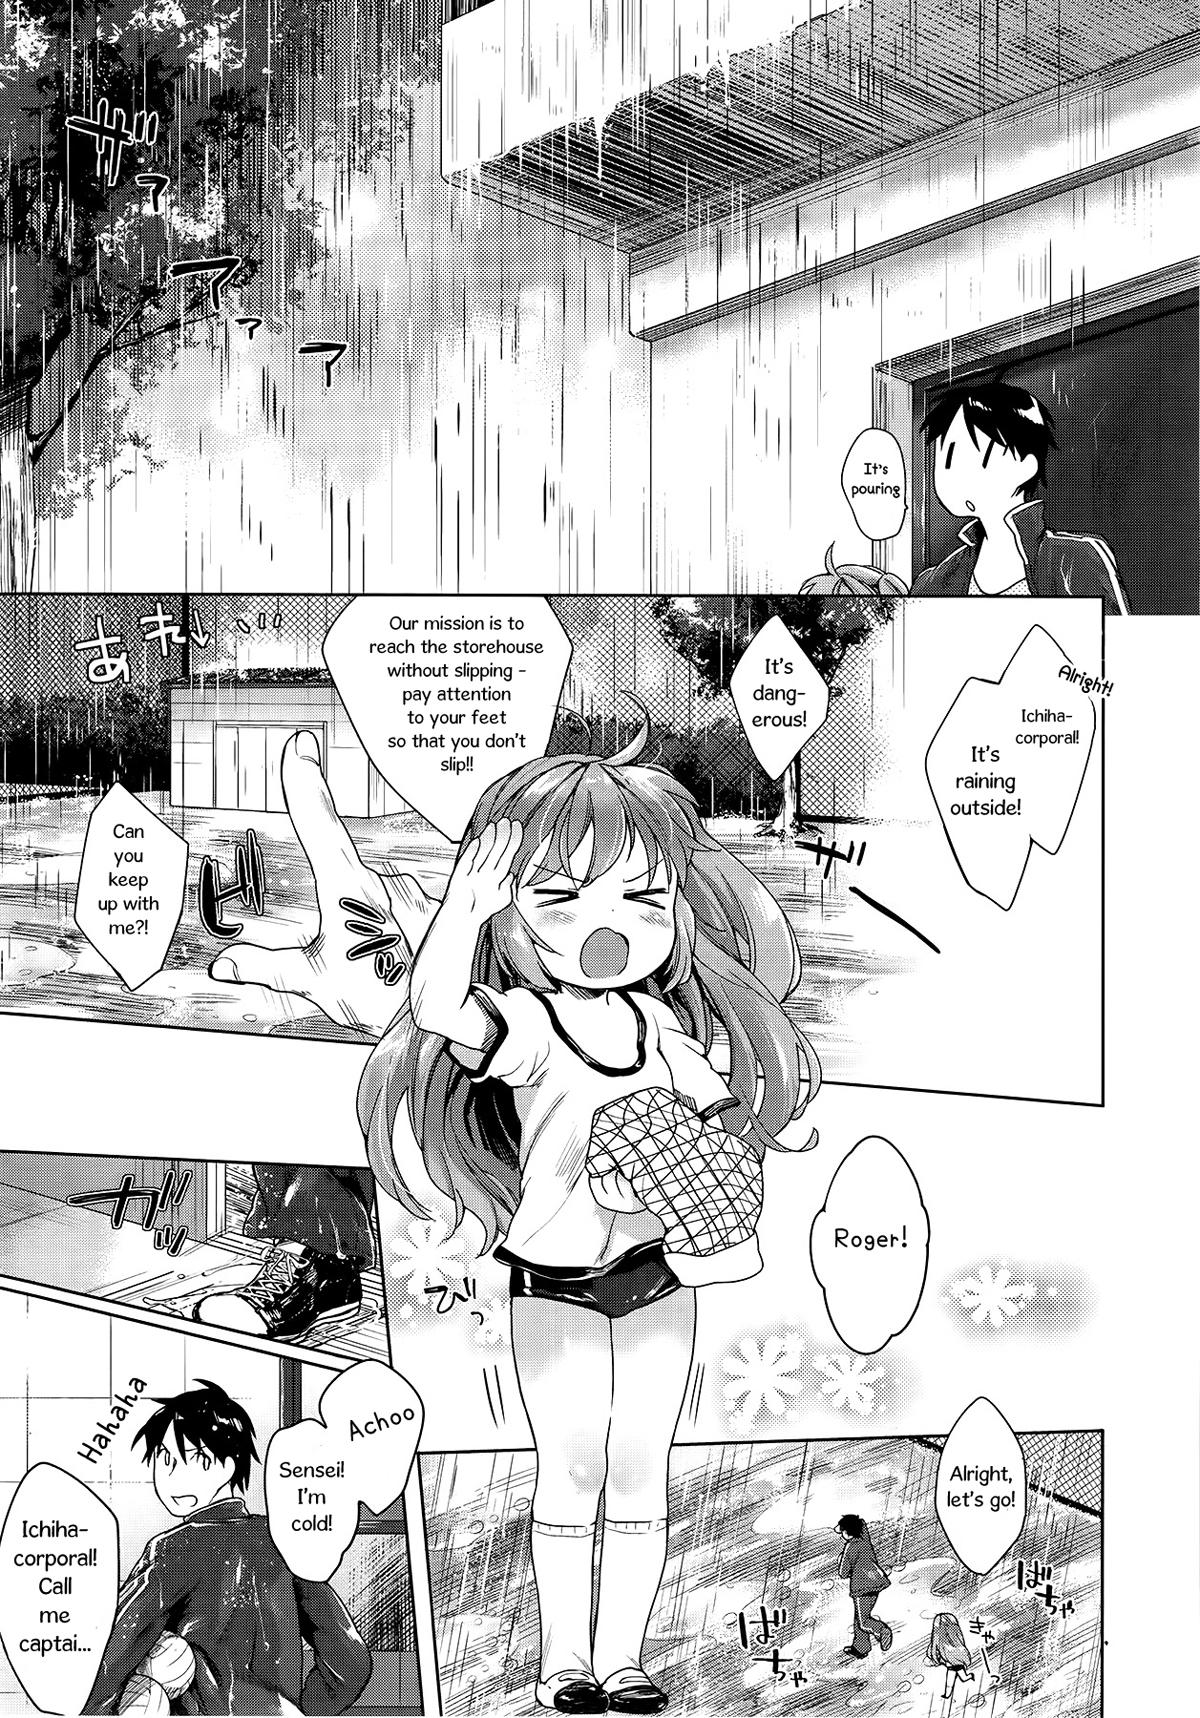 Best Blowjob Yuudachi Houkago Squirting - Page 5